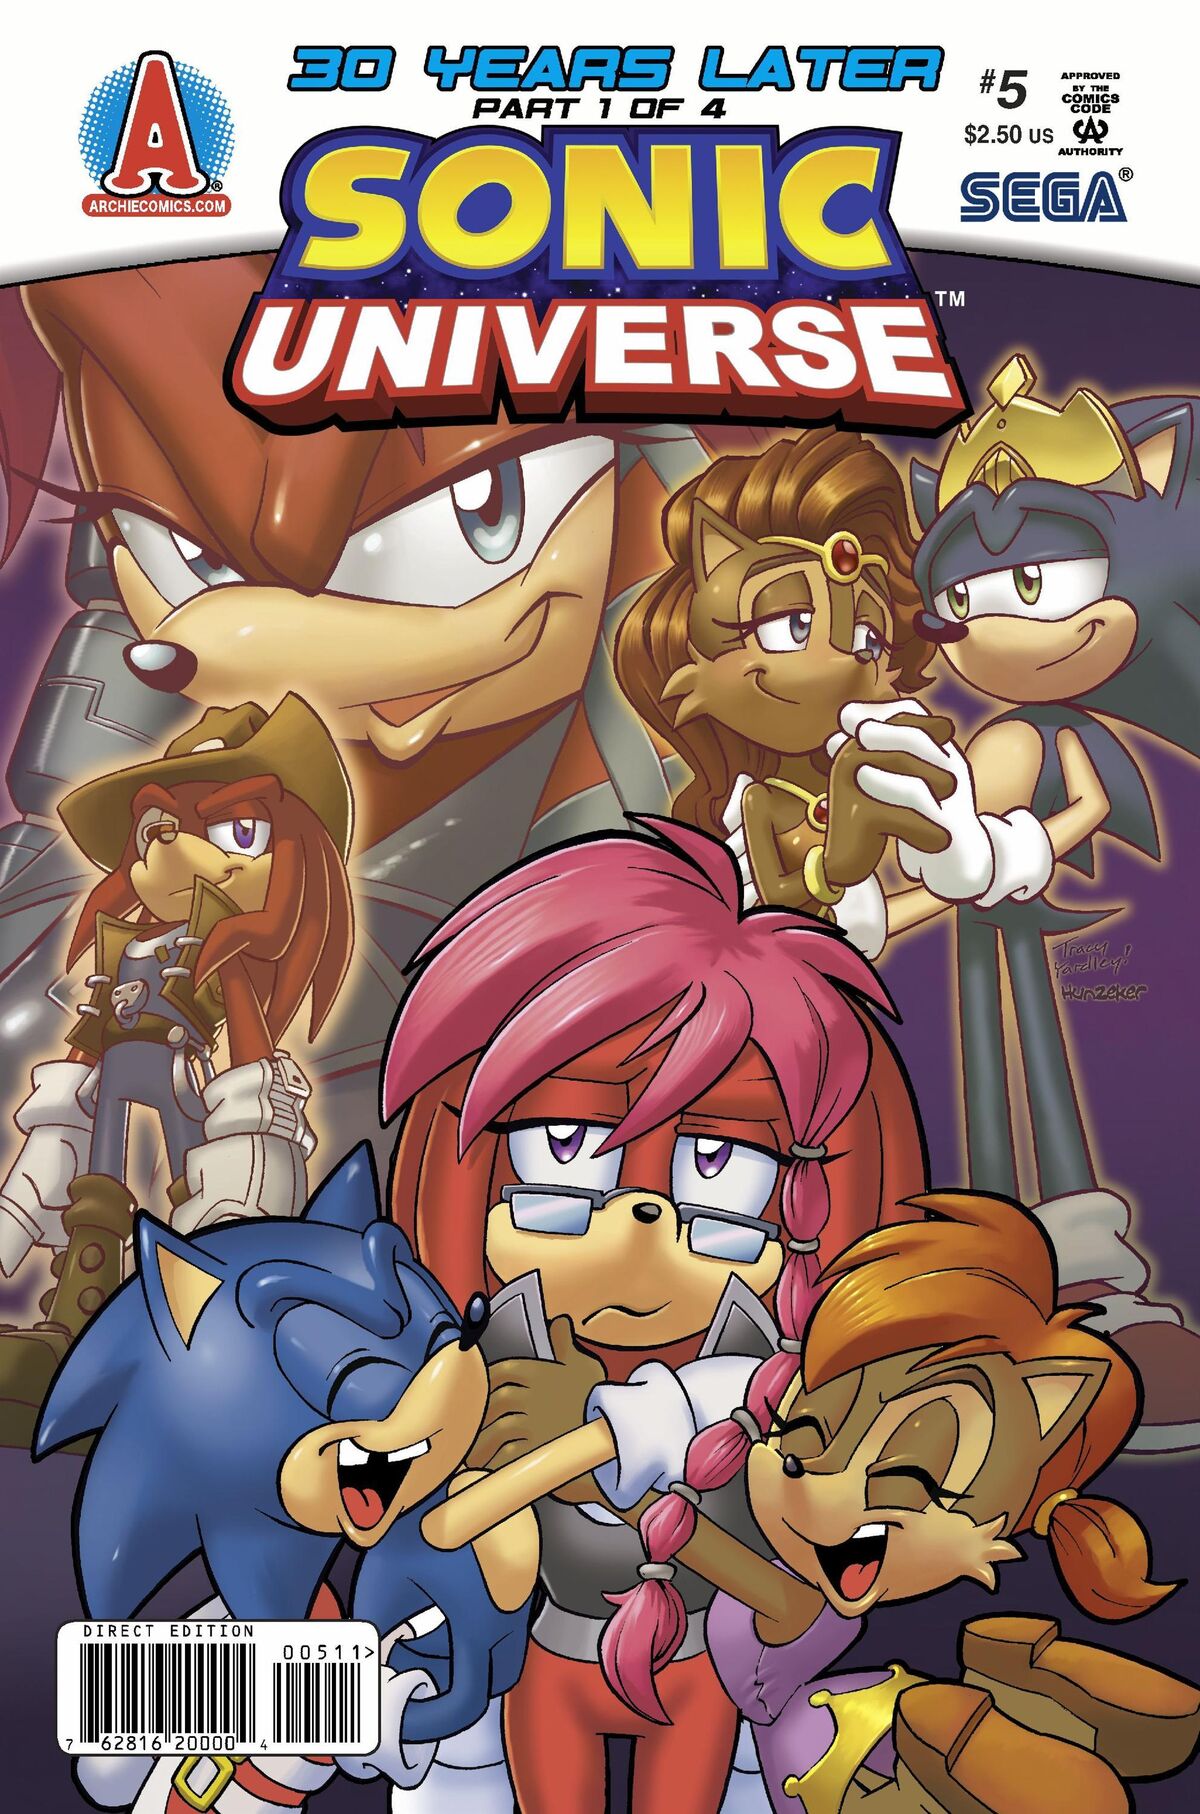 Sonic Universe Issue #46 - Worlds Collide in 5 